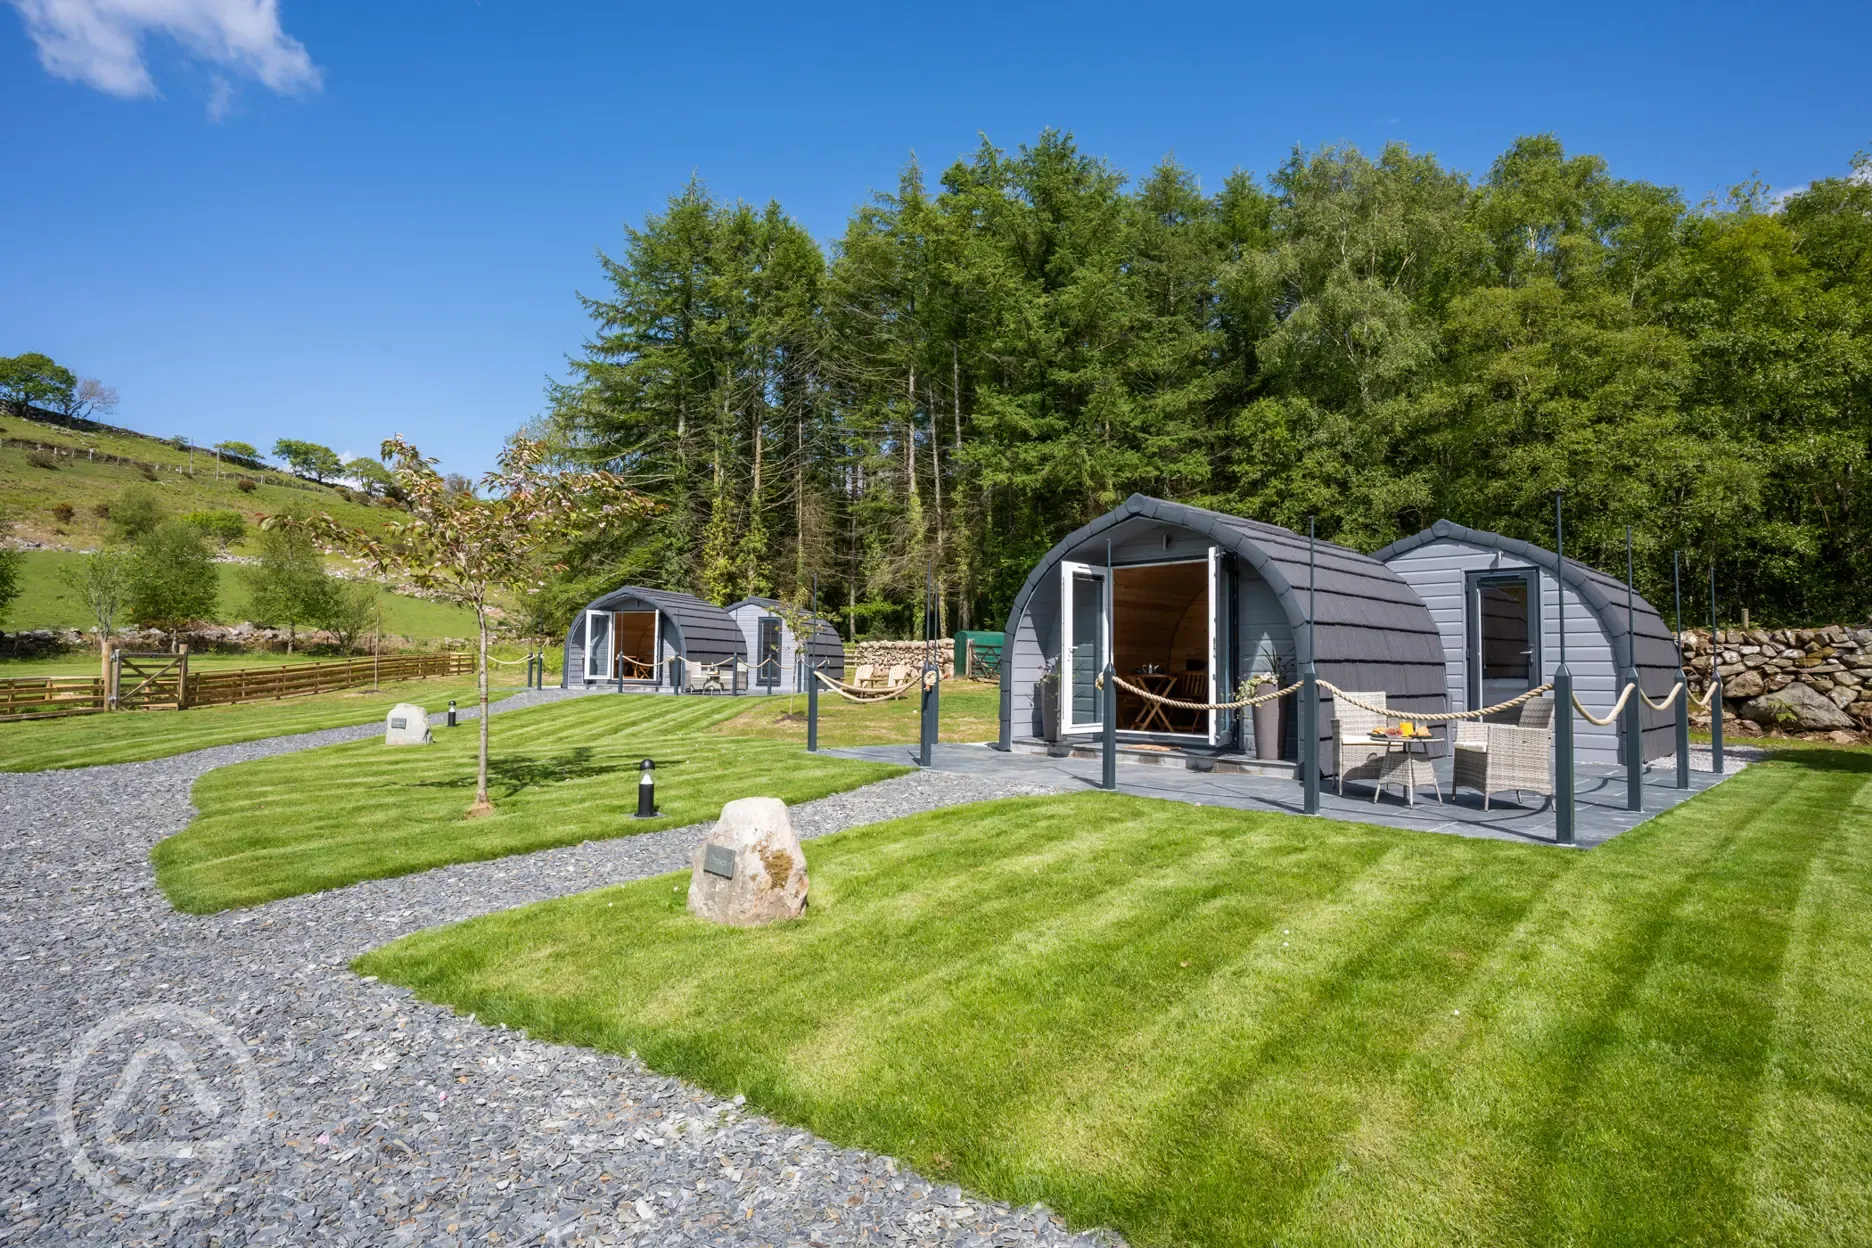 Luxury ensuite glamping pods